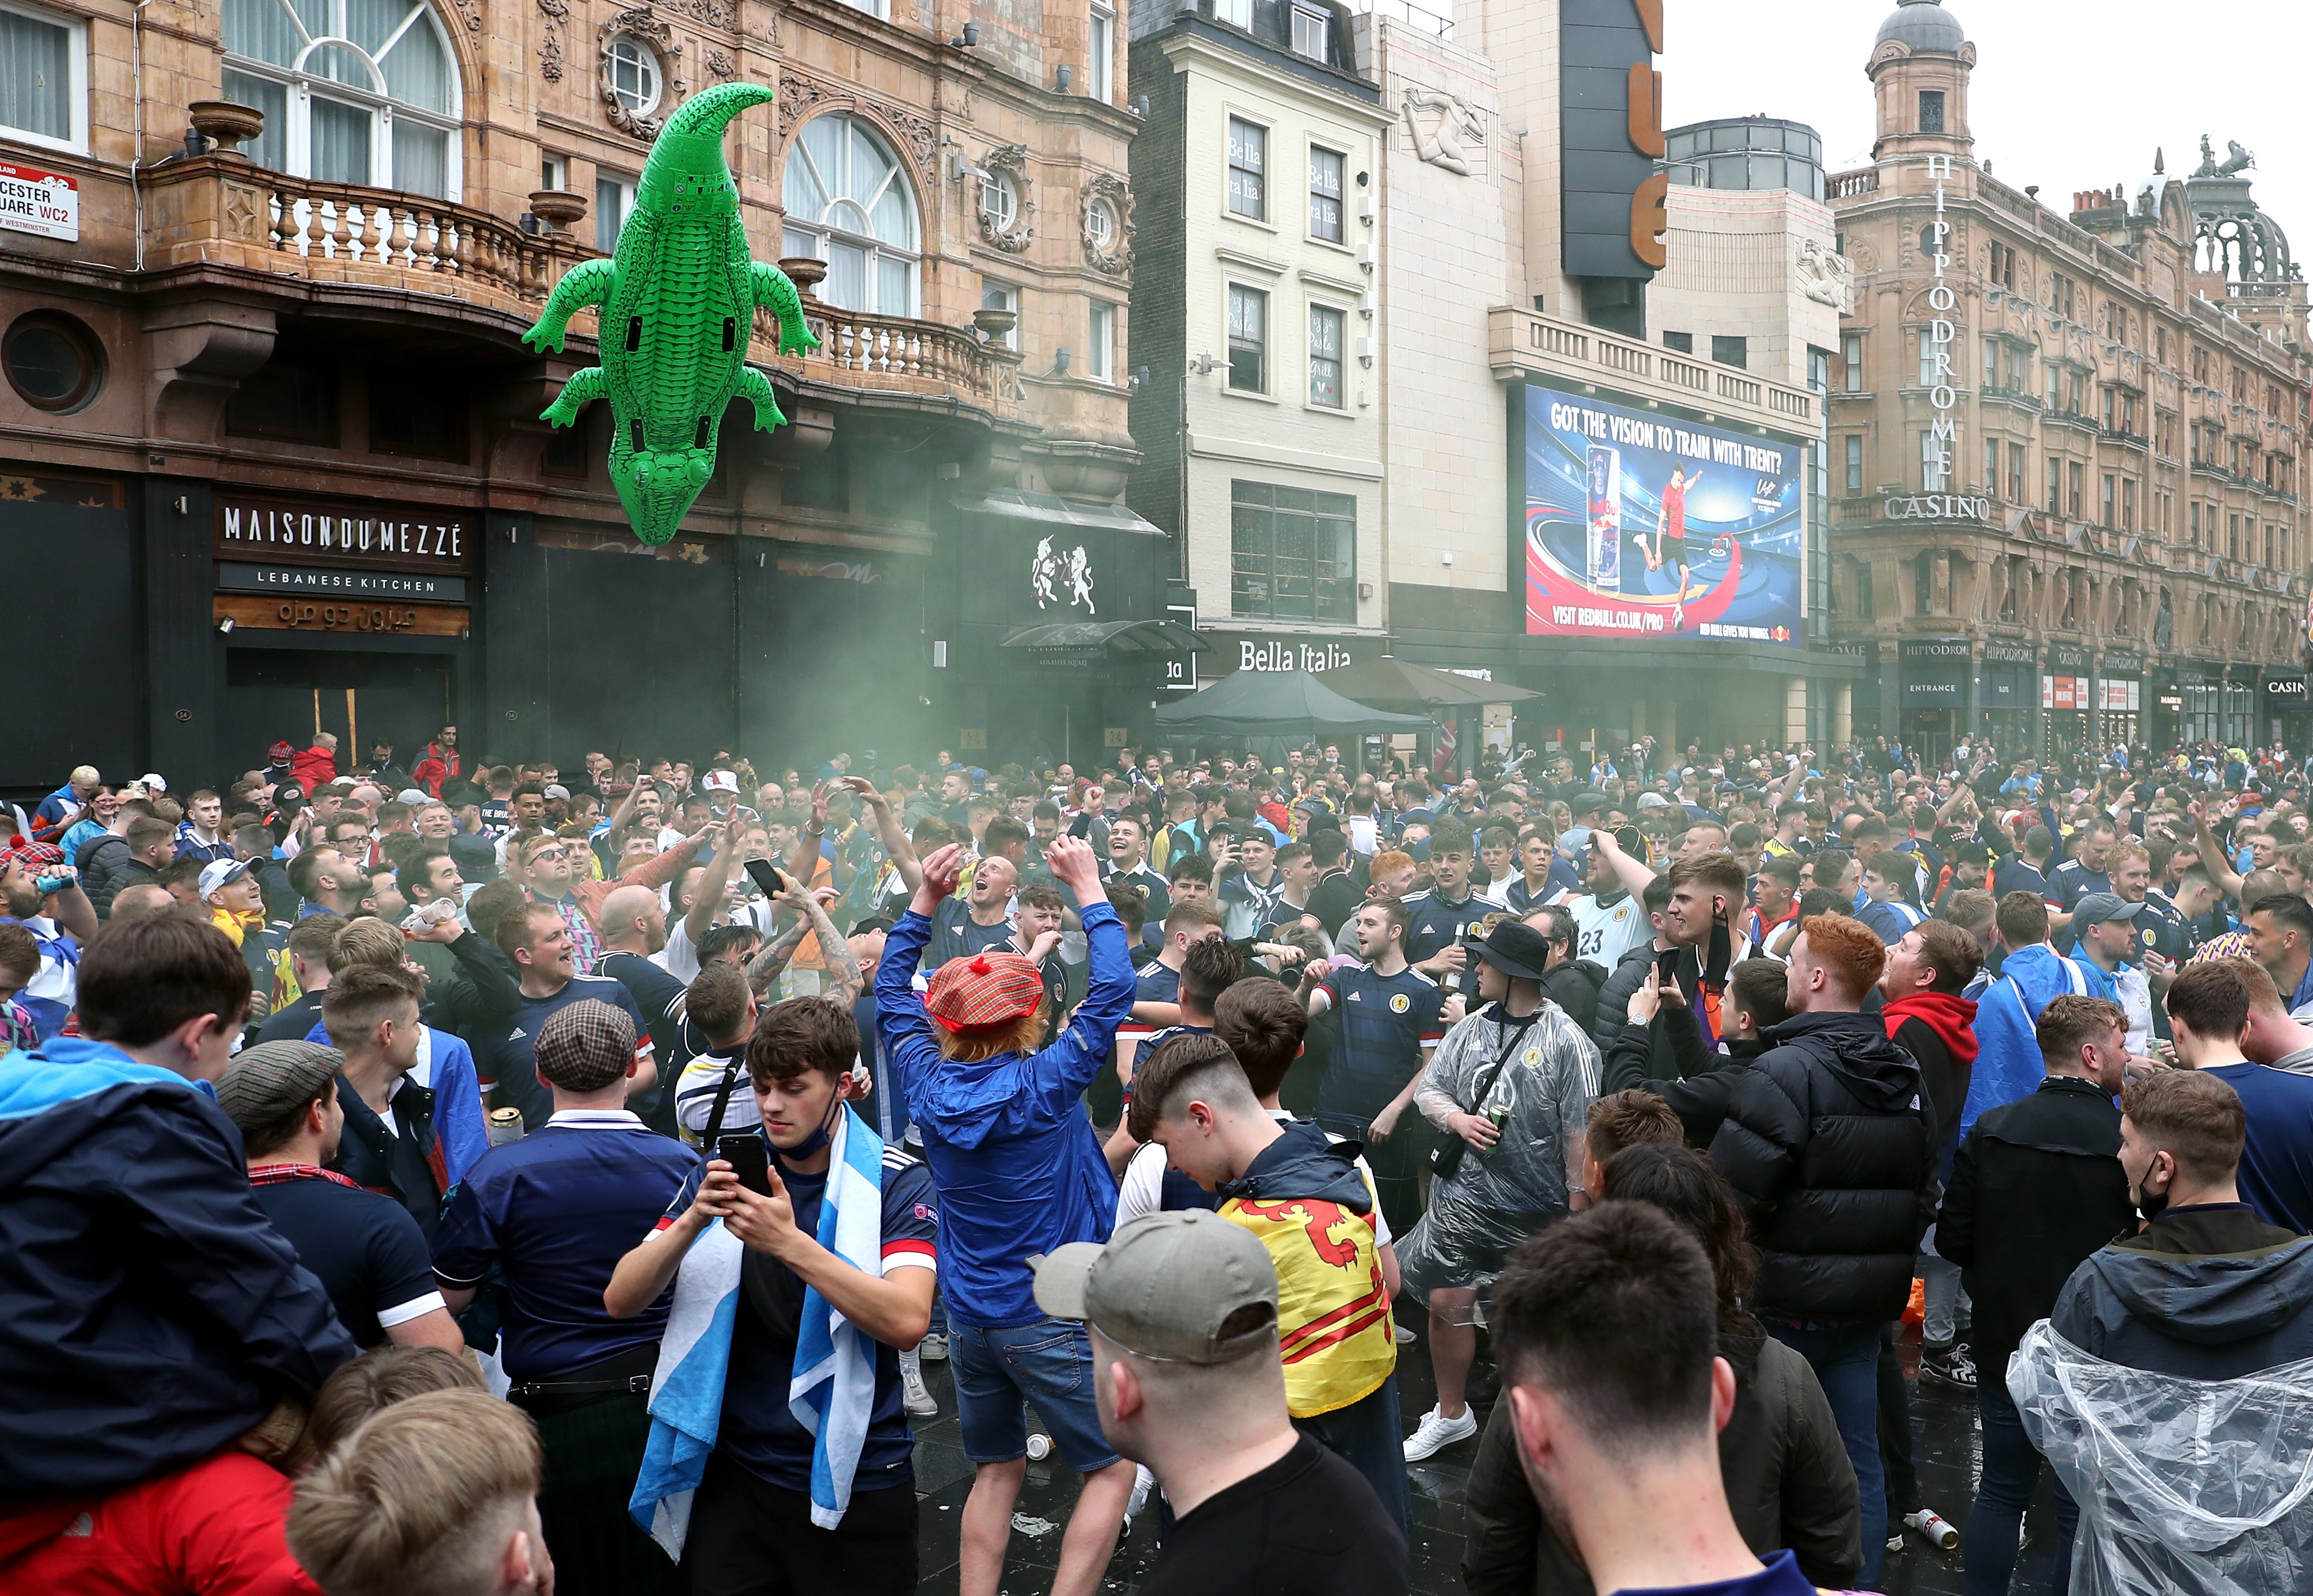 The party is well underway in central London ahead of kick-off at 7pm.